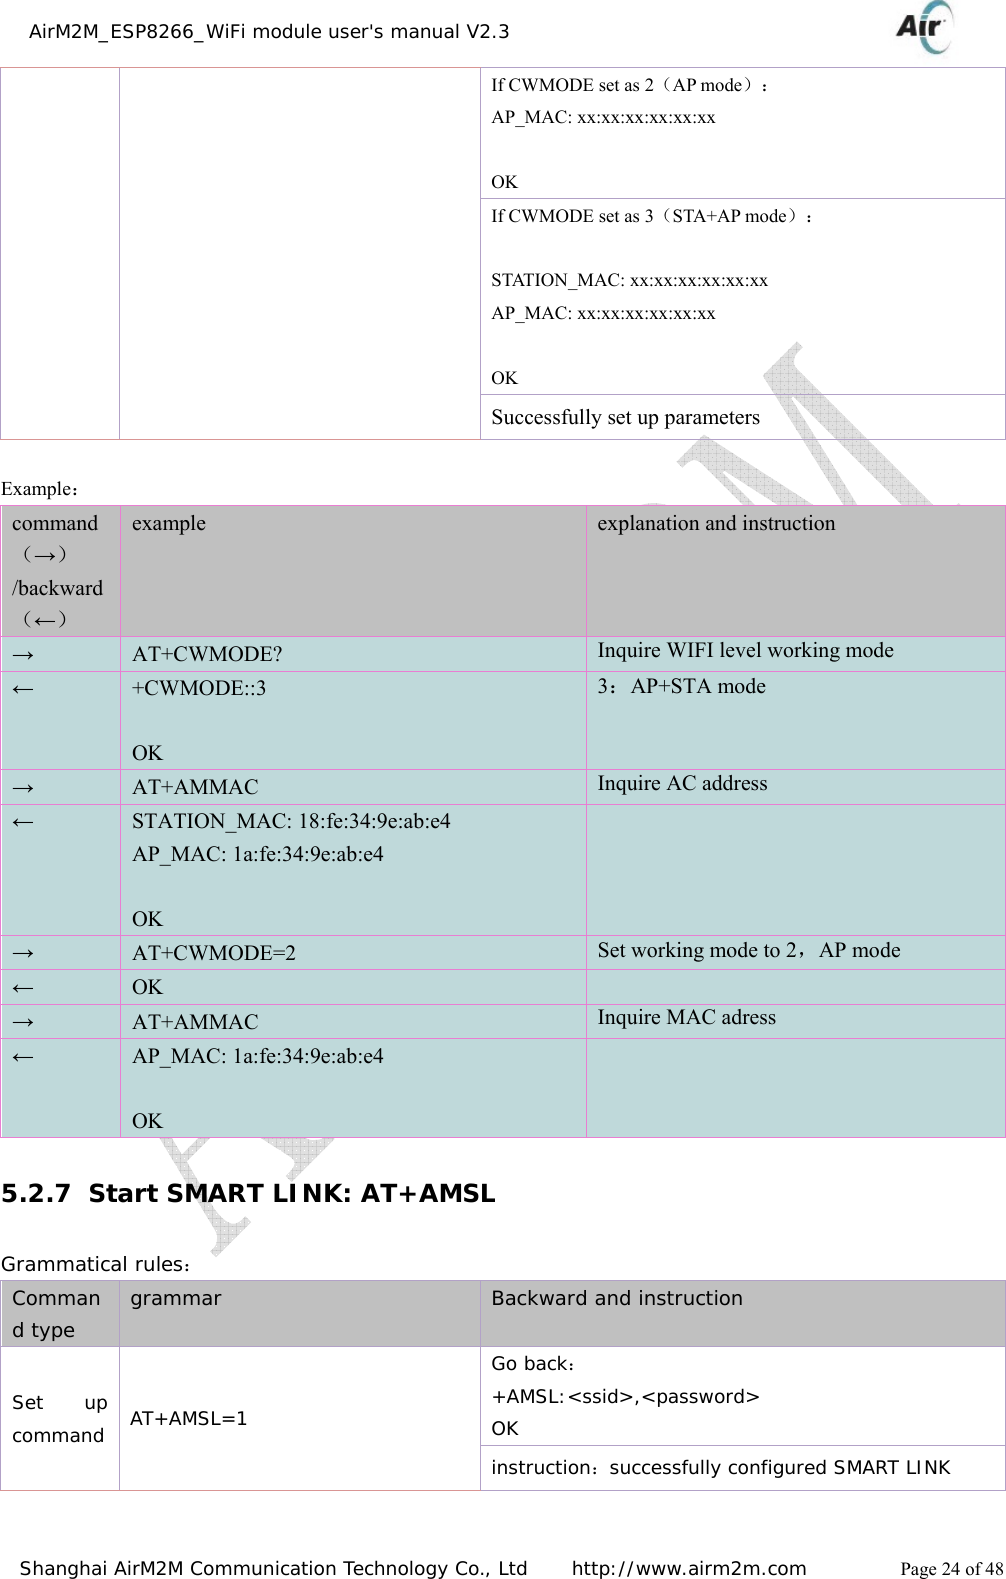    AirM2M_ESP8266_WiFi module user&apos;s manual V2.3   Shanghai AirM2M Communication Technology Co., Ltd     http://www.airm2m.com          Page 24 of 48 If CWMODE set as 2（AP mode）： AP_MAC: xx:xx:xx:xx:xx:xx  OK  If CWMODE set as 3（STA+AP mode）：  STATION_MAC: xx:xx:xx:xx:xx:xx AP_MAC: xx:xx:xx:xx:xx:xx  OK  Successfully set up parameters  Example： command（→） /backward（←） example  explanation and instruction → AT+CWMODE? Inquire WIFI level working mode ← +CWMODE::3  OK 3：AP+STA mode → AT+AMMAC  Inquire AC address ← STATION_MAC: 18:fe:34:9e:ab:e4 AP_MAC: 1a:fe:34:9e:ab:e4  OK  → AT+CWMODE=2  Set working mode to 2，AP mode ← OK   → AT+AMMAC  Inquire MAC adress ← AP_MAC: 1a:fe:34:9e:ab:e4  OK  5.2.7 Start SMART LINK: AT+AMSL Grammatical rules： Command type  grammar  Backward and instruction Set up command  AT+AMSL=1 Go back： +AMSL:&lt;ssid&gt;,&lt;password&gt; OK  instruction：successfully configured SMART LINK   